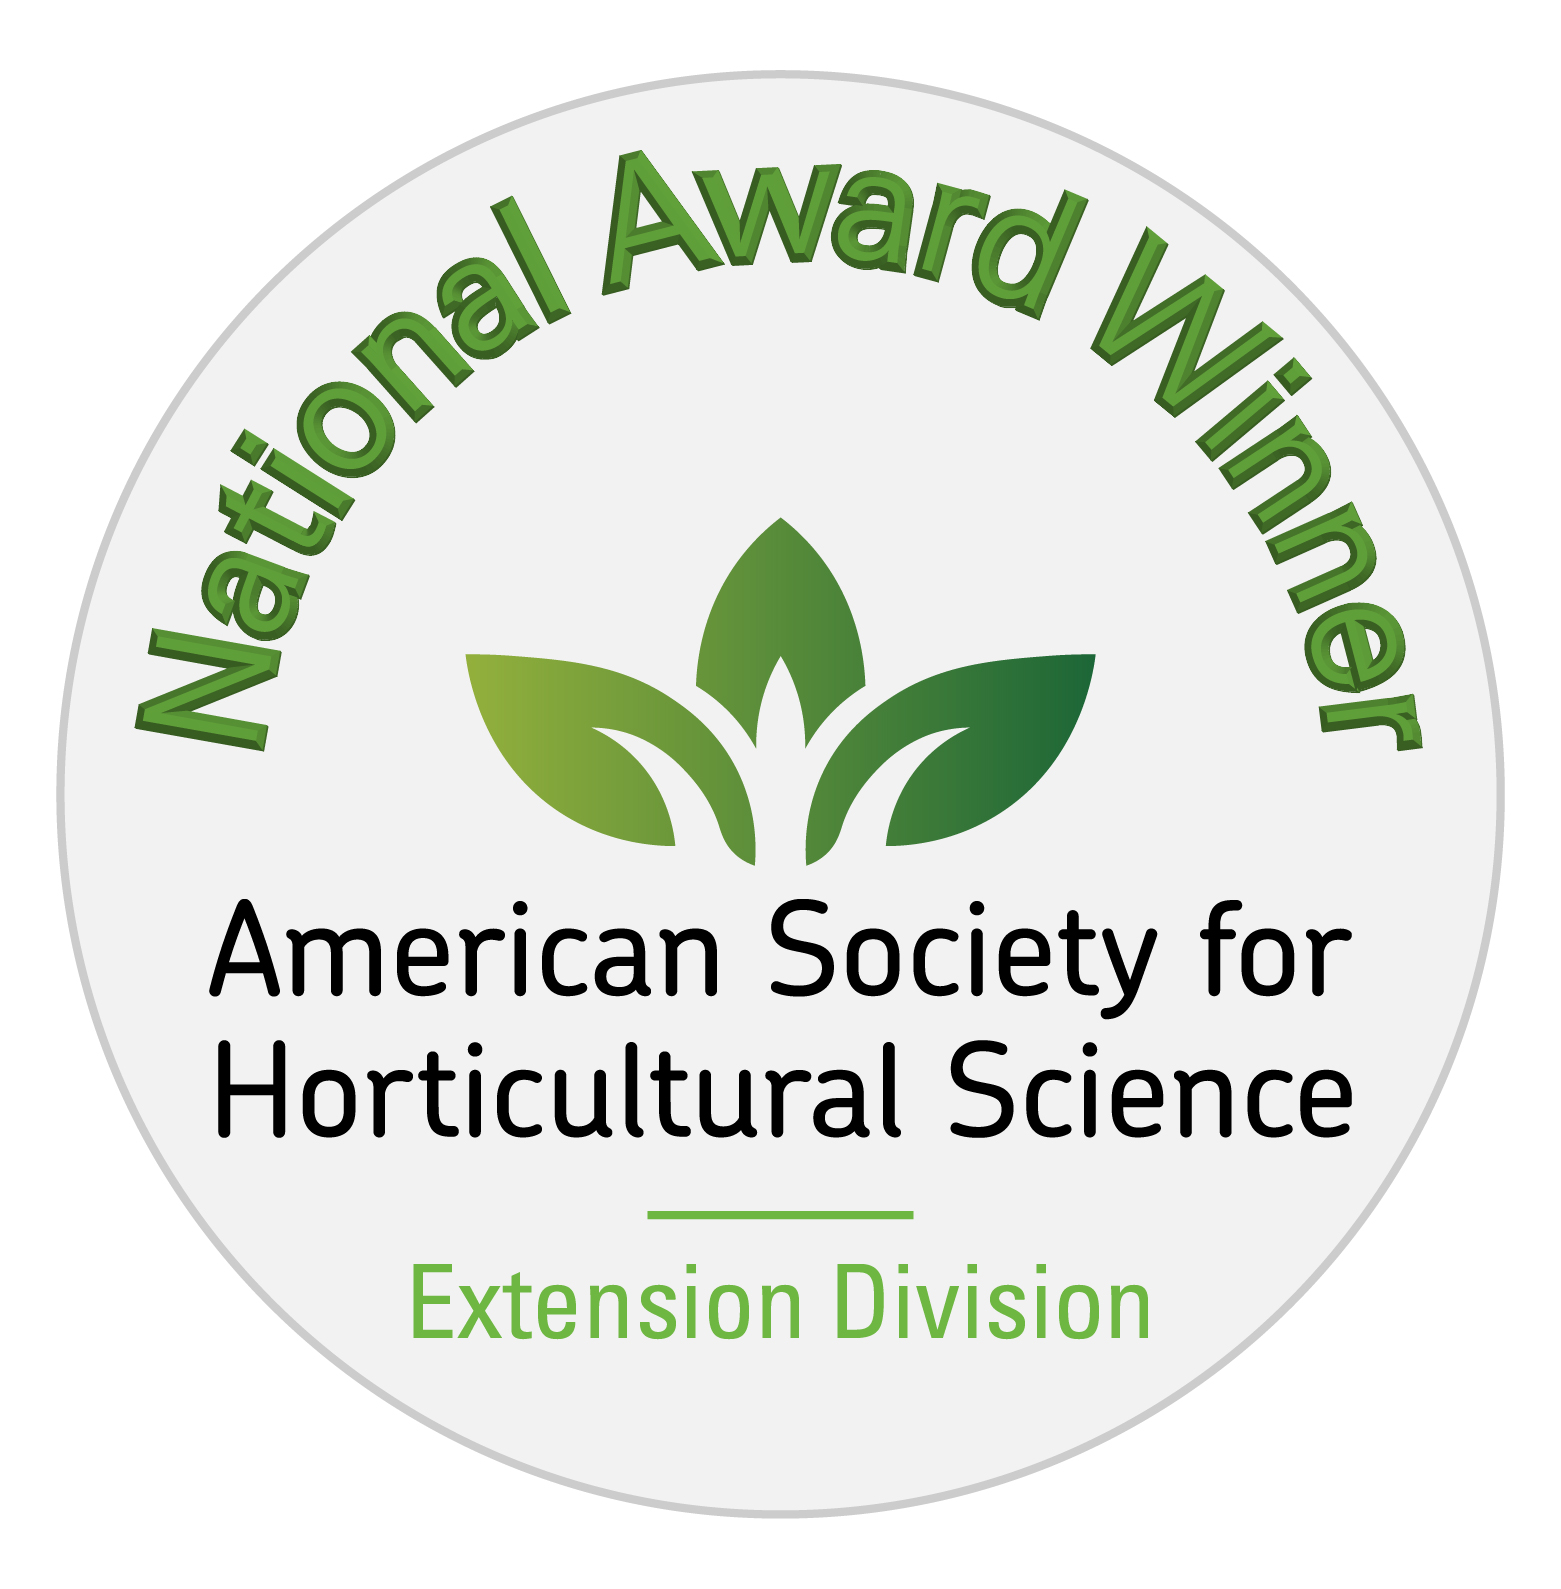 An award seal that says "National Award Winner from the American Society for Horticultural Science, Extension Division"